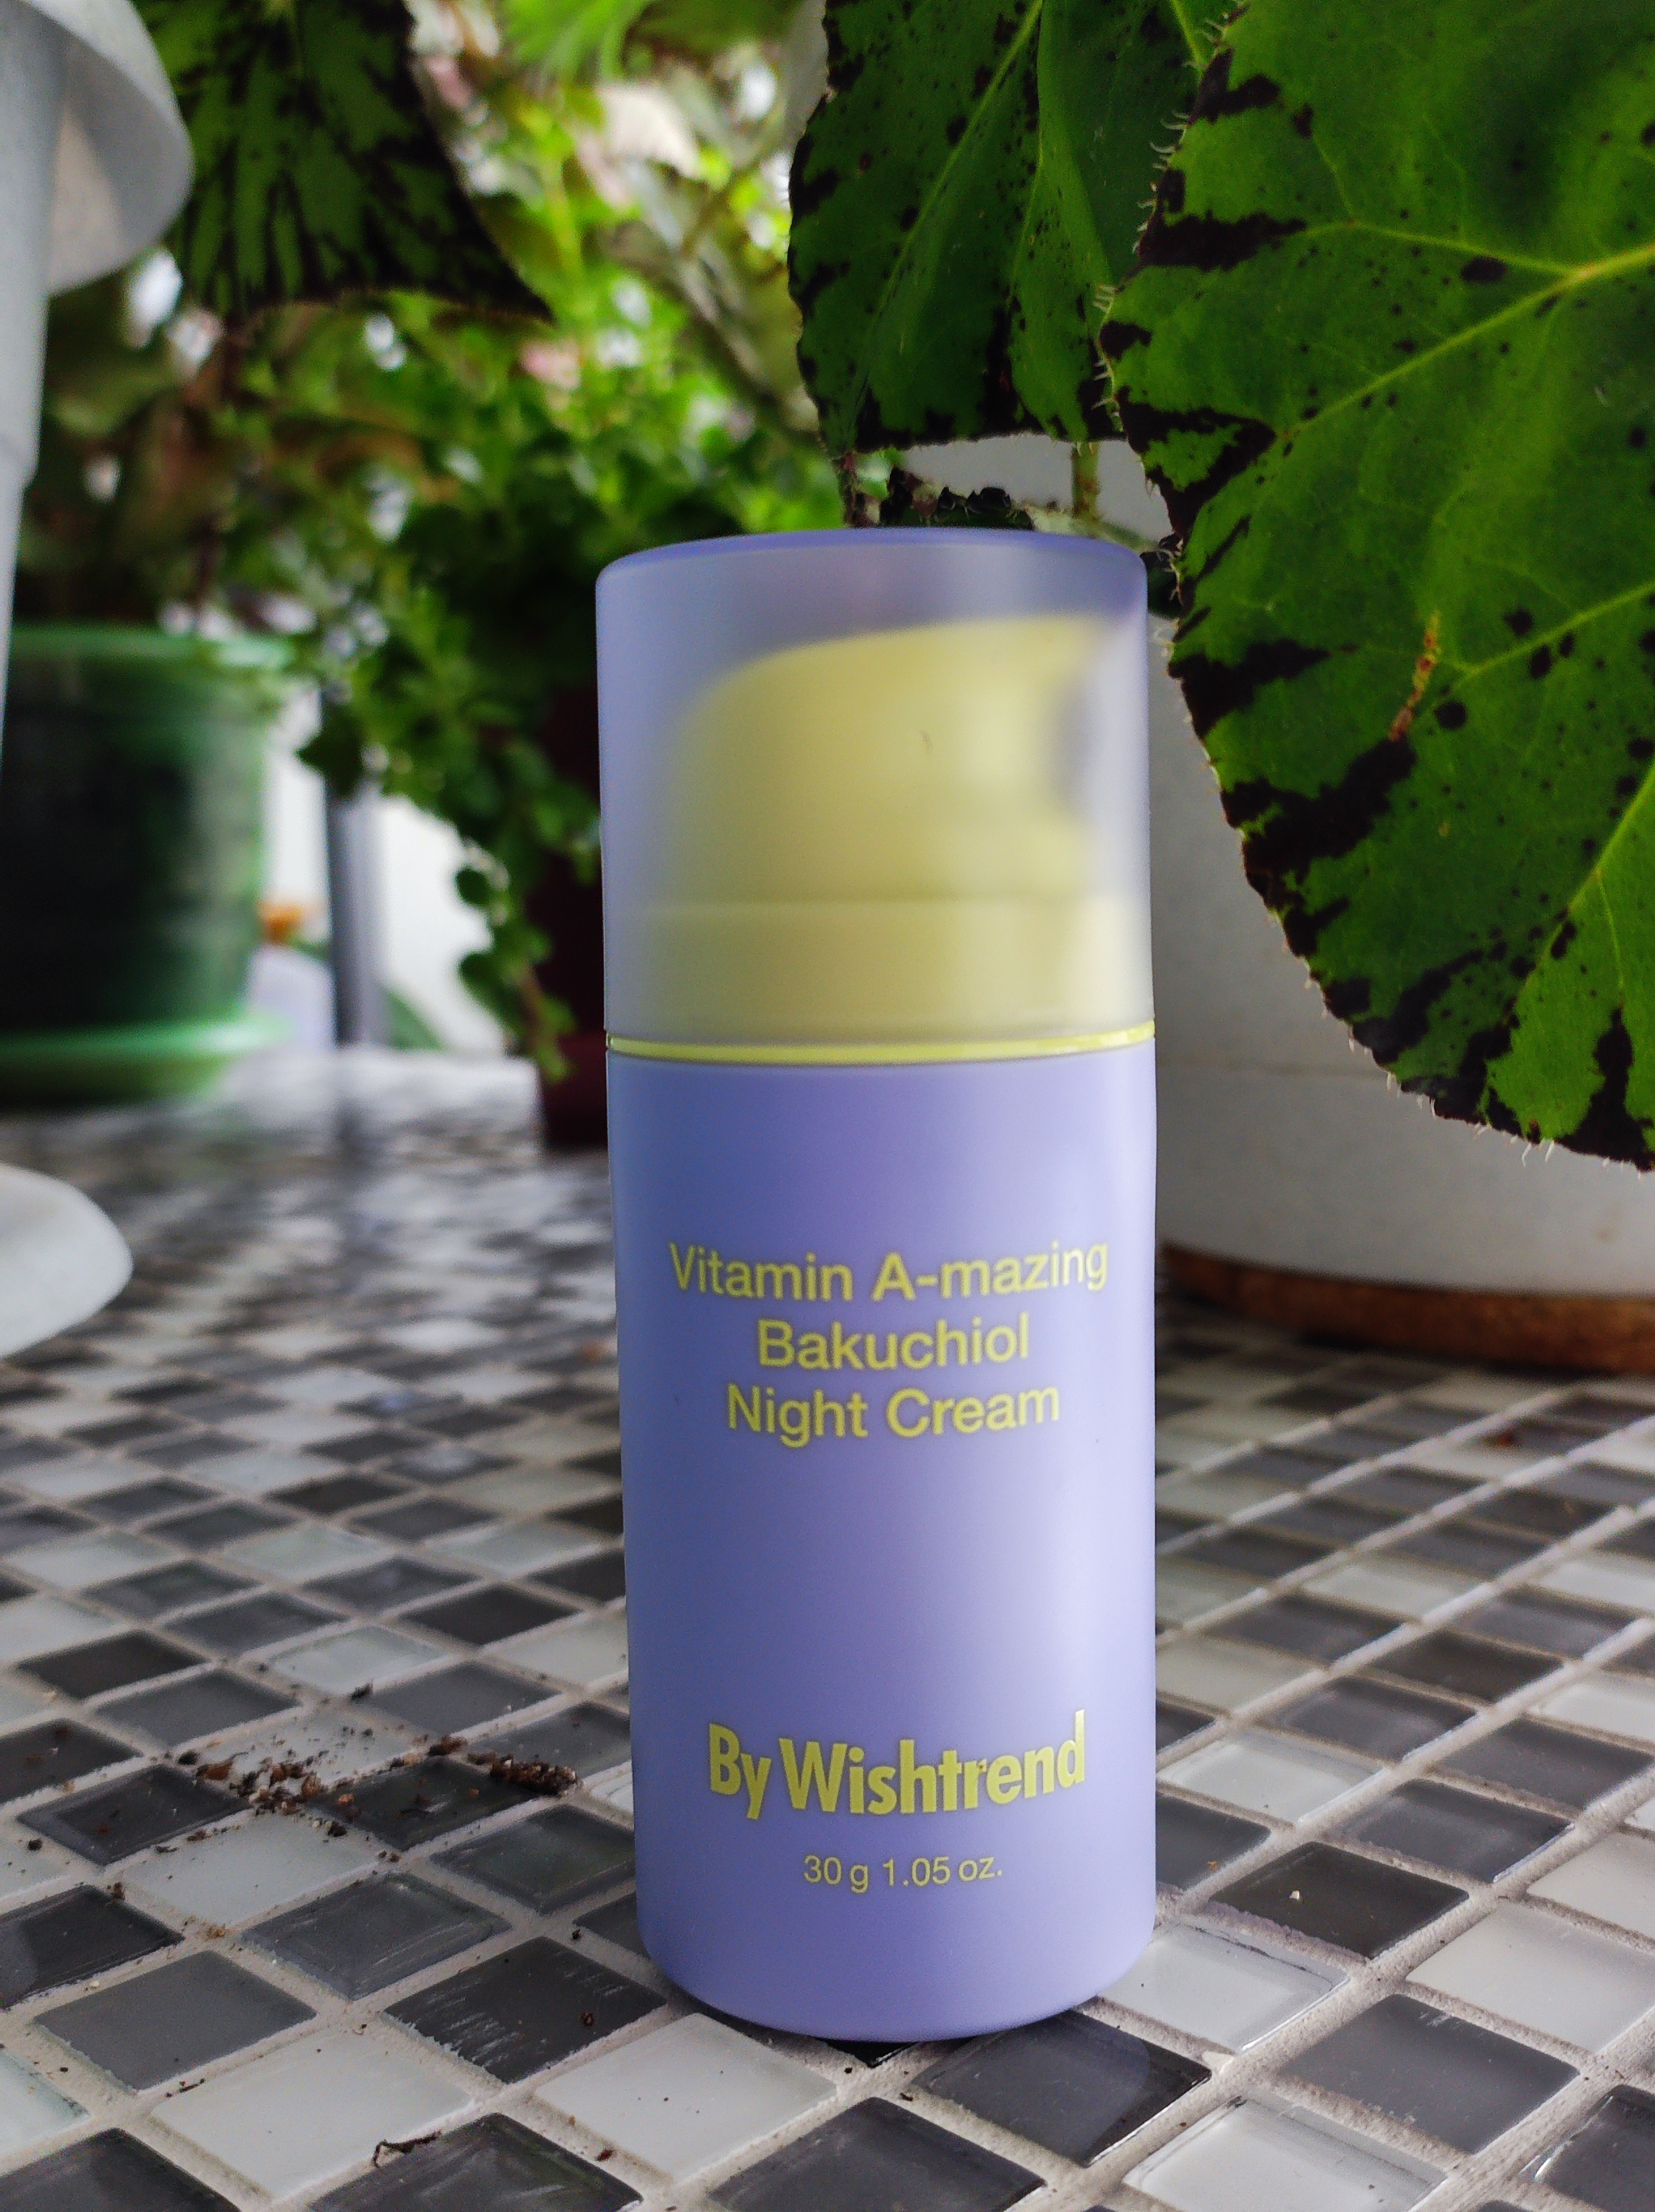 Крем by wishtrend vitamin a mazing bakuchiol. By Wishtrend Vitamin a-mazing Bakuchiol Night Cream. By Wishtrend Vitamin a-mazing Bakuchiol Night. By Wishtrend крем с ретинолом. Vitamin amazing Bakuchiol Night Cream.